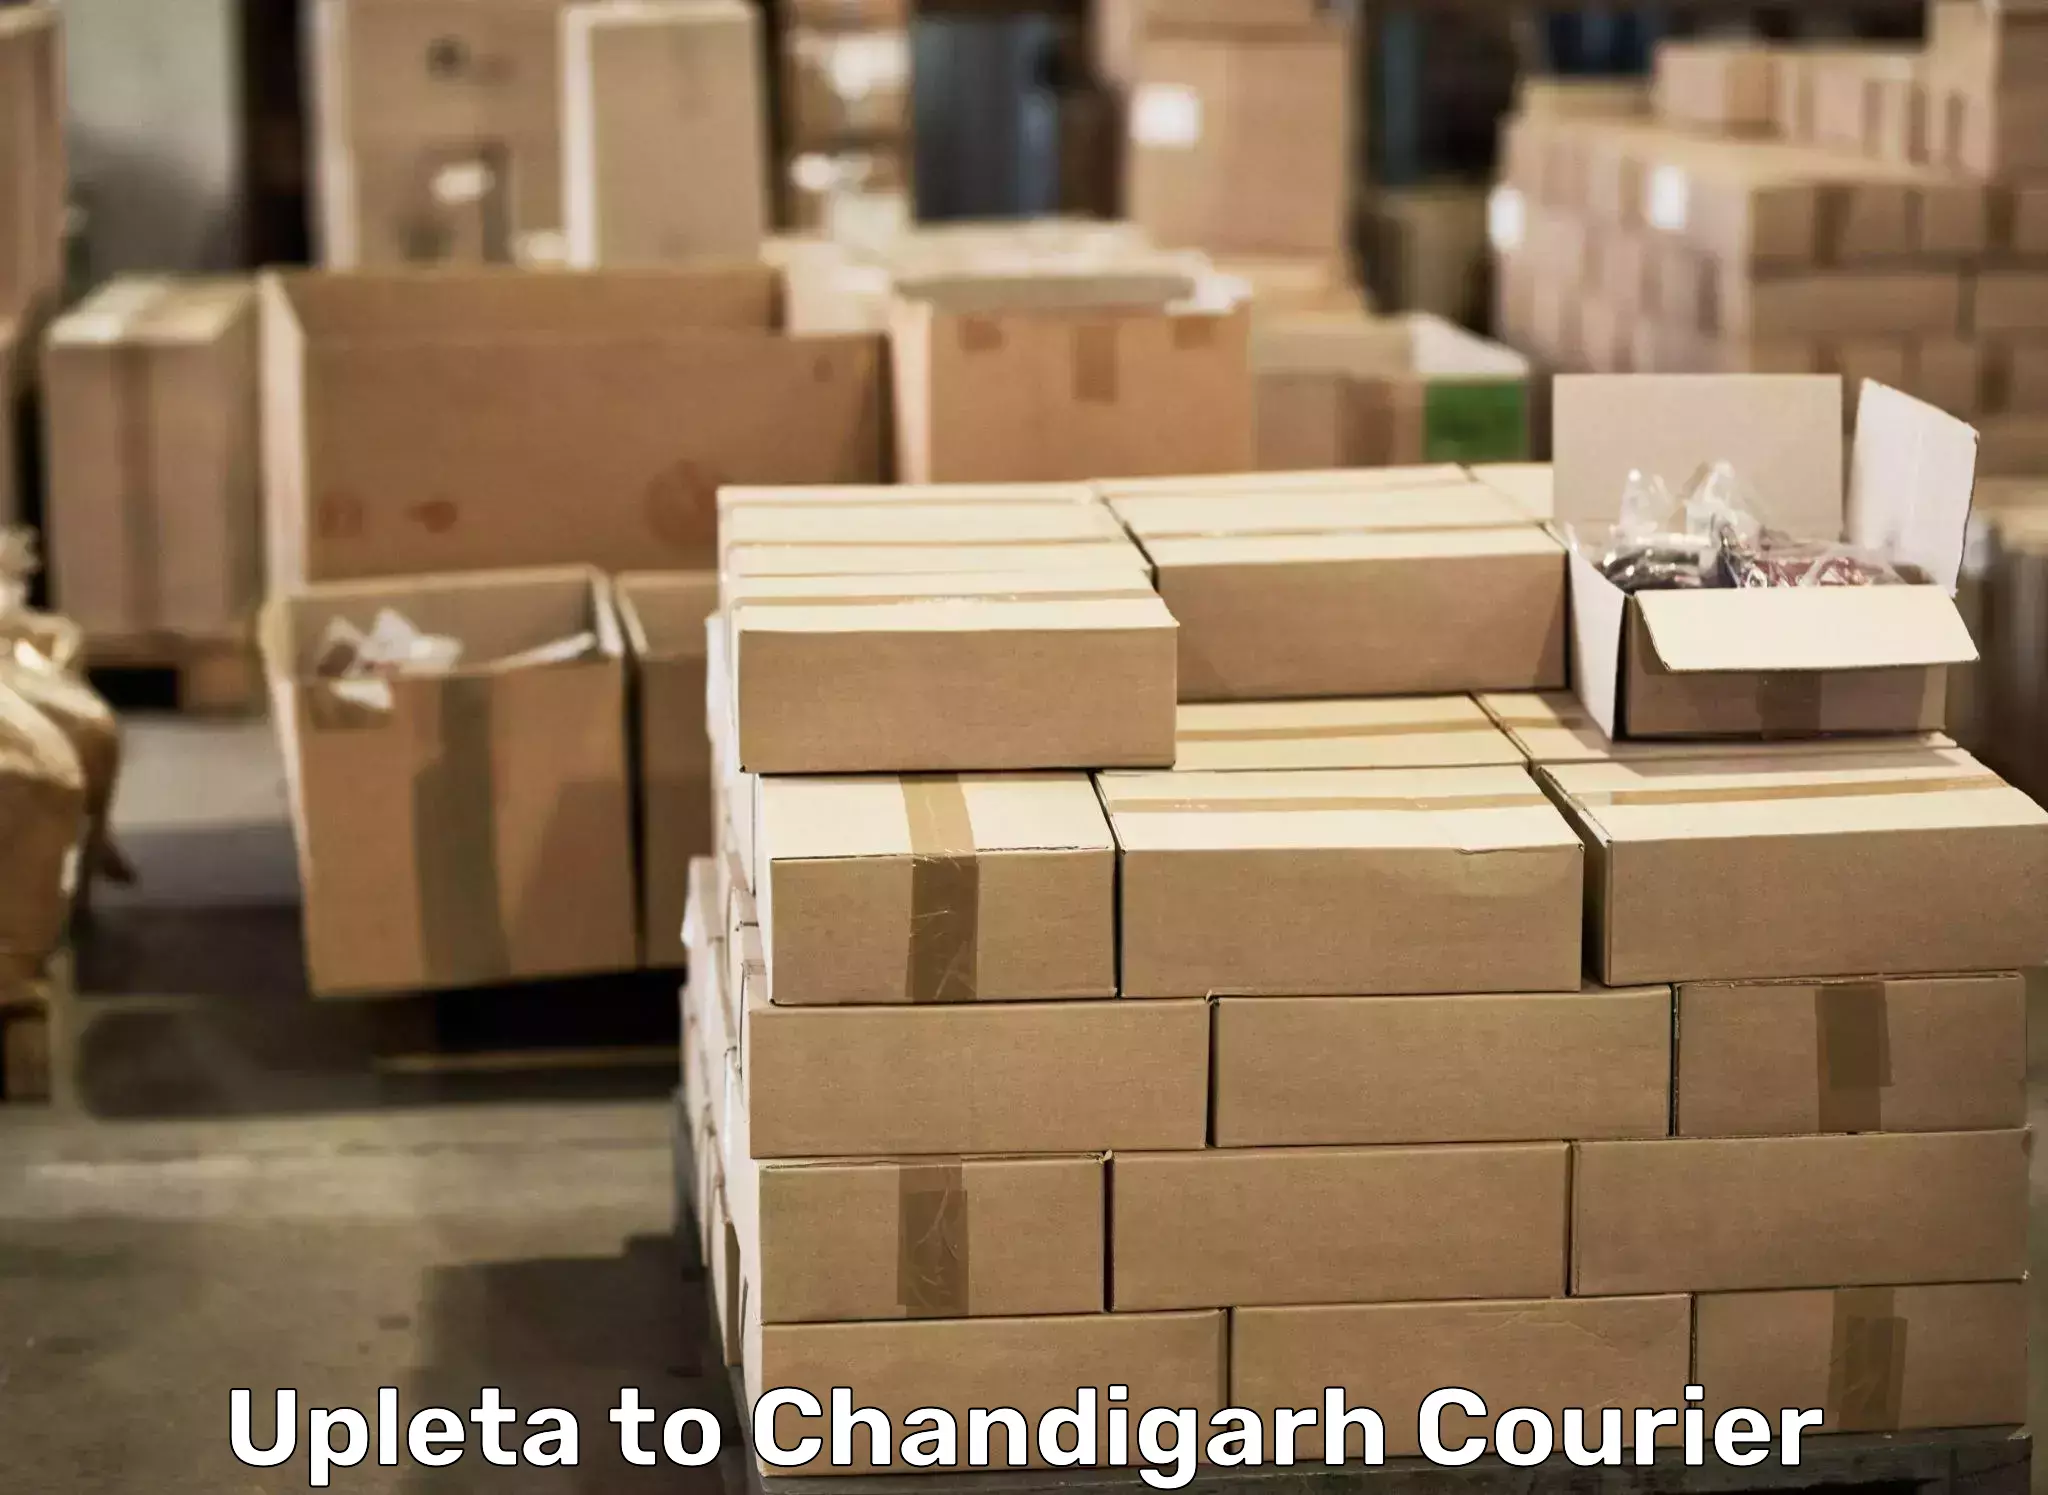 Furniture delivery service Upleta to Chandigarh